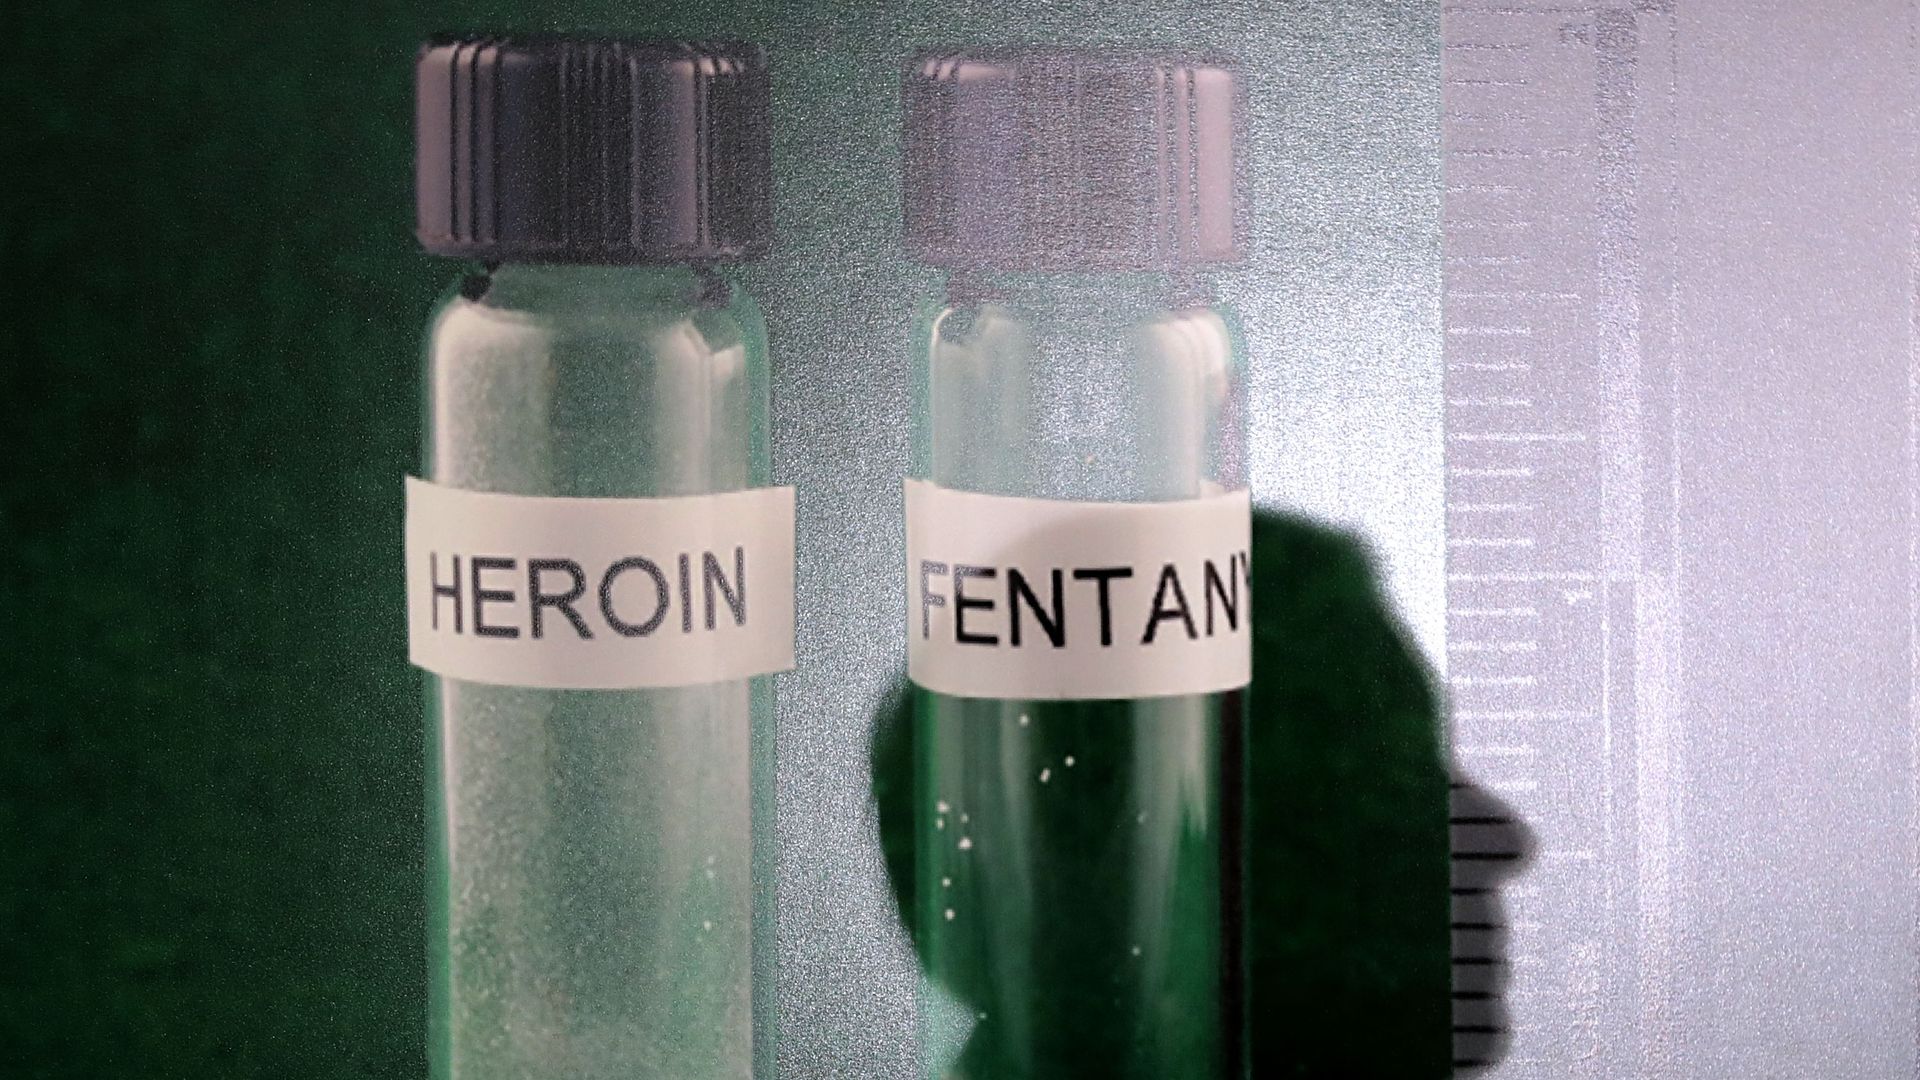 Vials of Heroin and Fentanyl